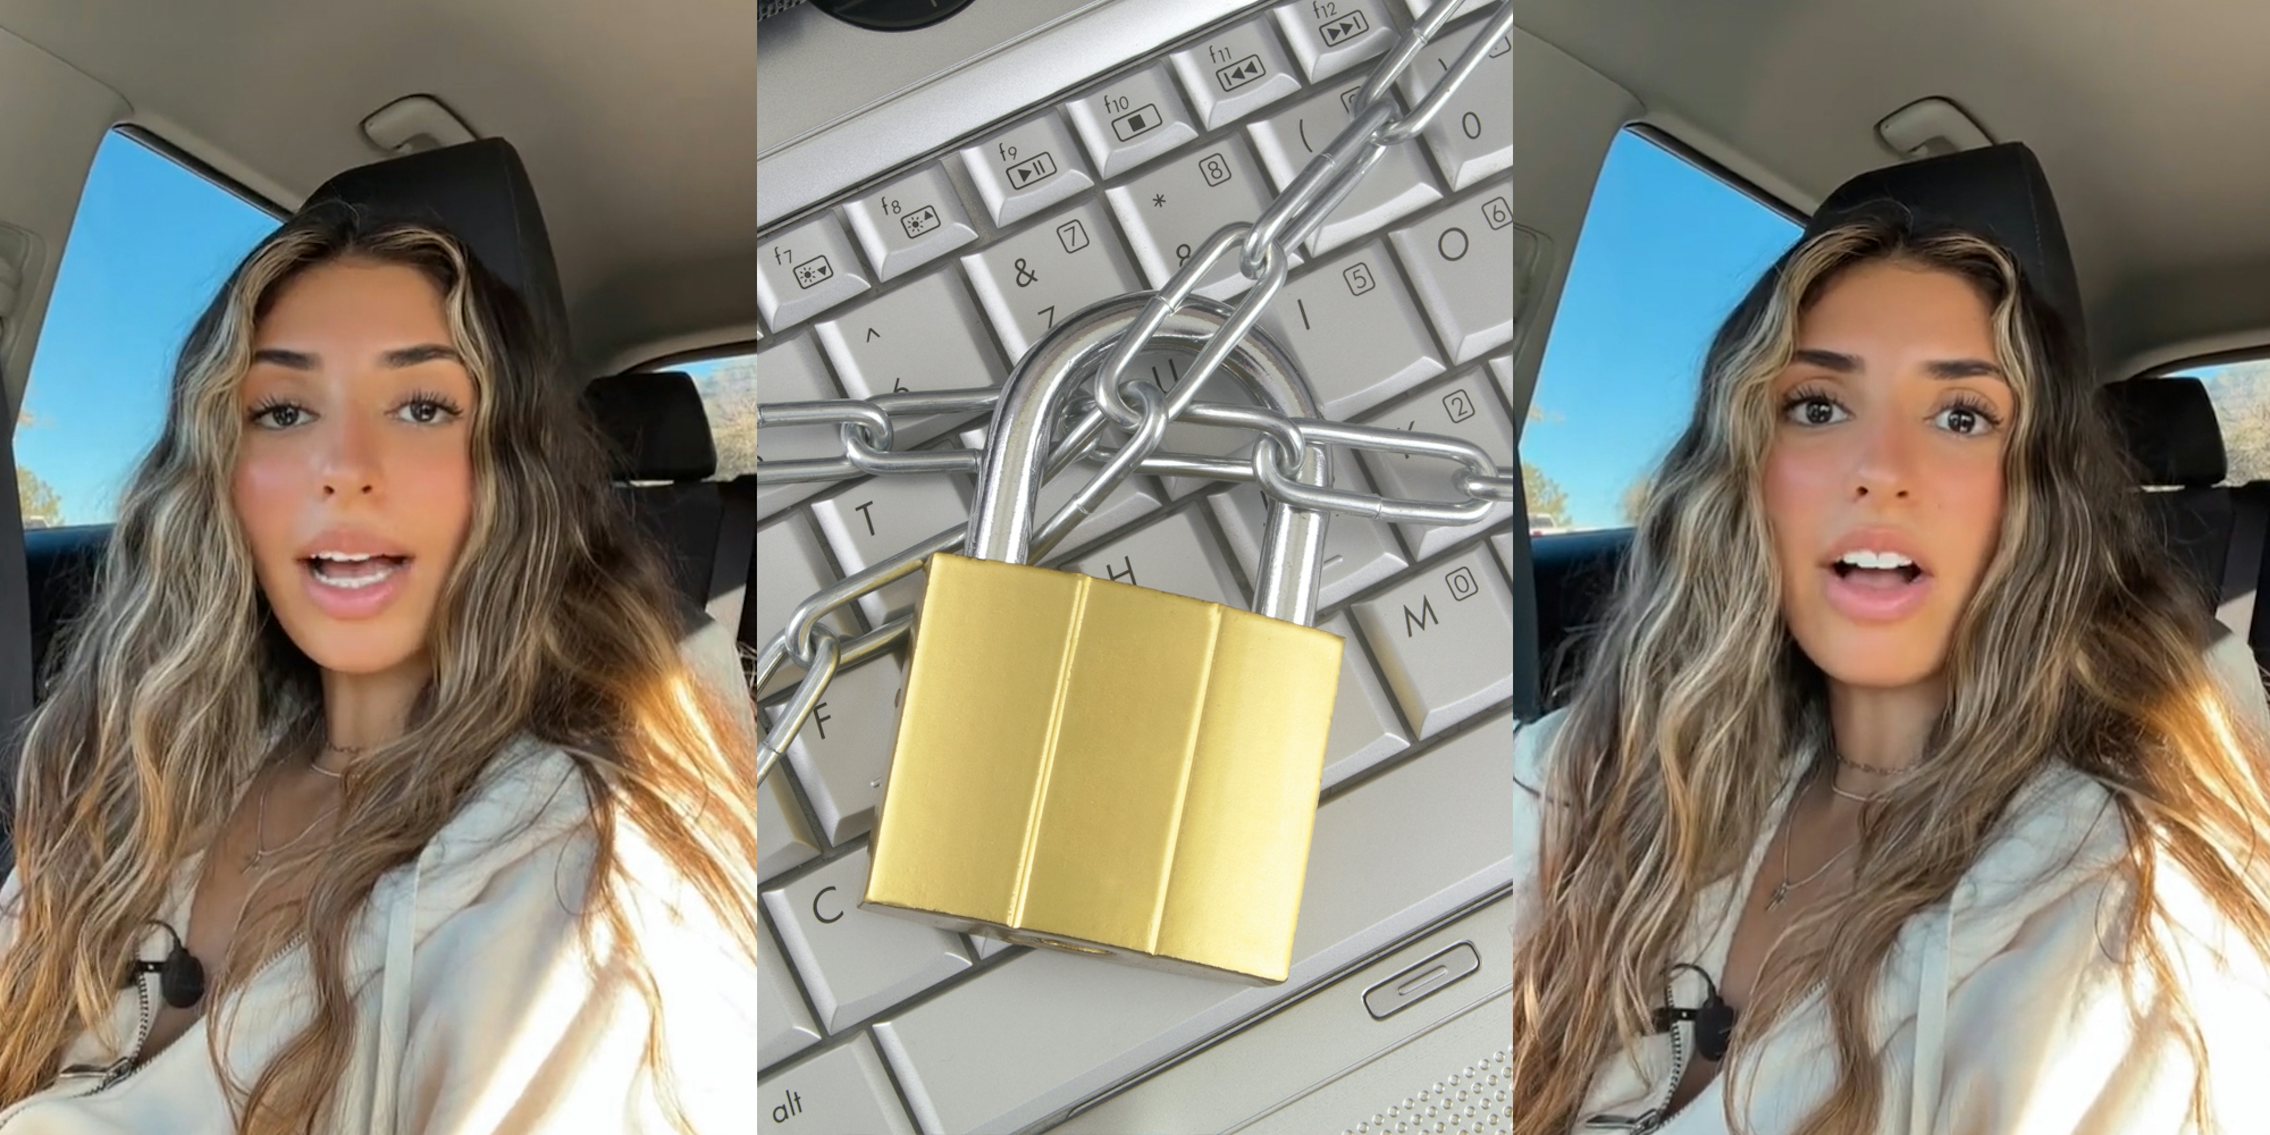 woman speaking in car (l) laptop keyboard with chains and lock (c) woman speaking in cat (r)